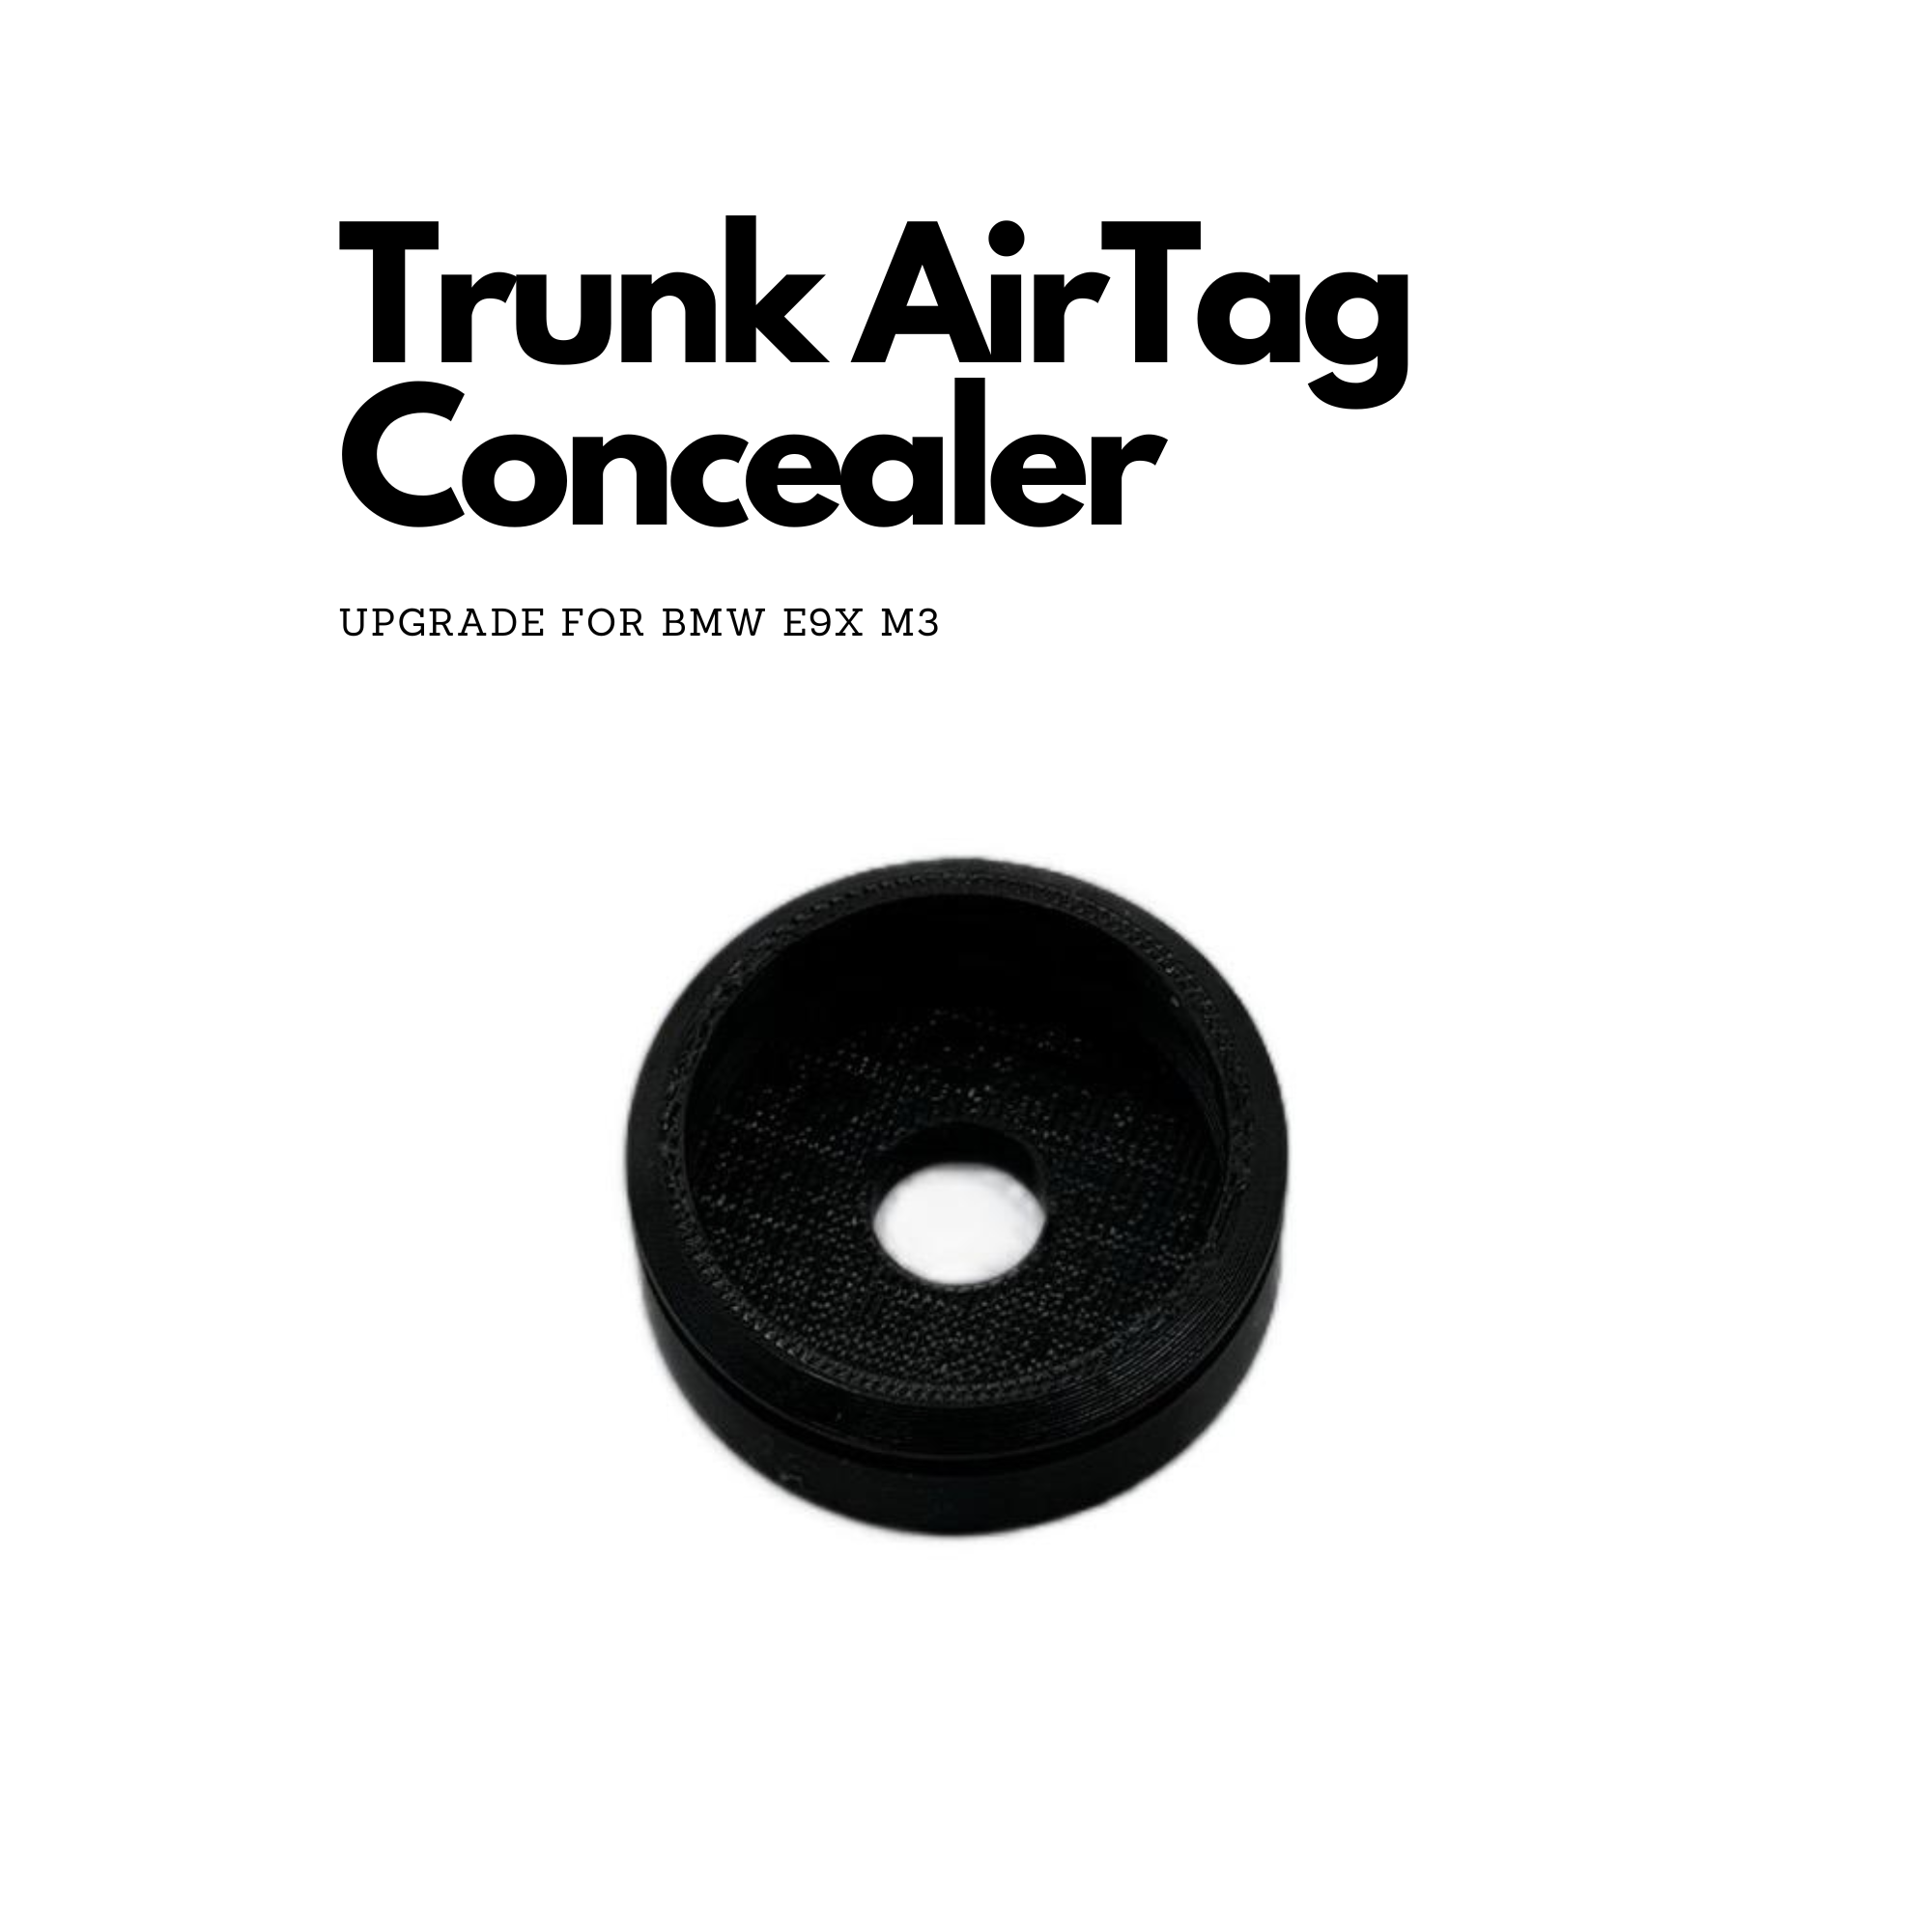 Undercover Trunk AirTag Concealer for BMW E92 M3 - Protect Your Car from Theft - Airtag not included